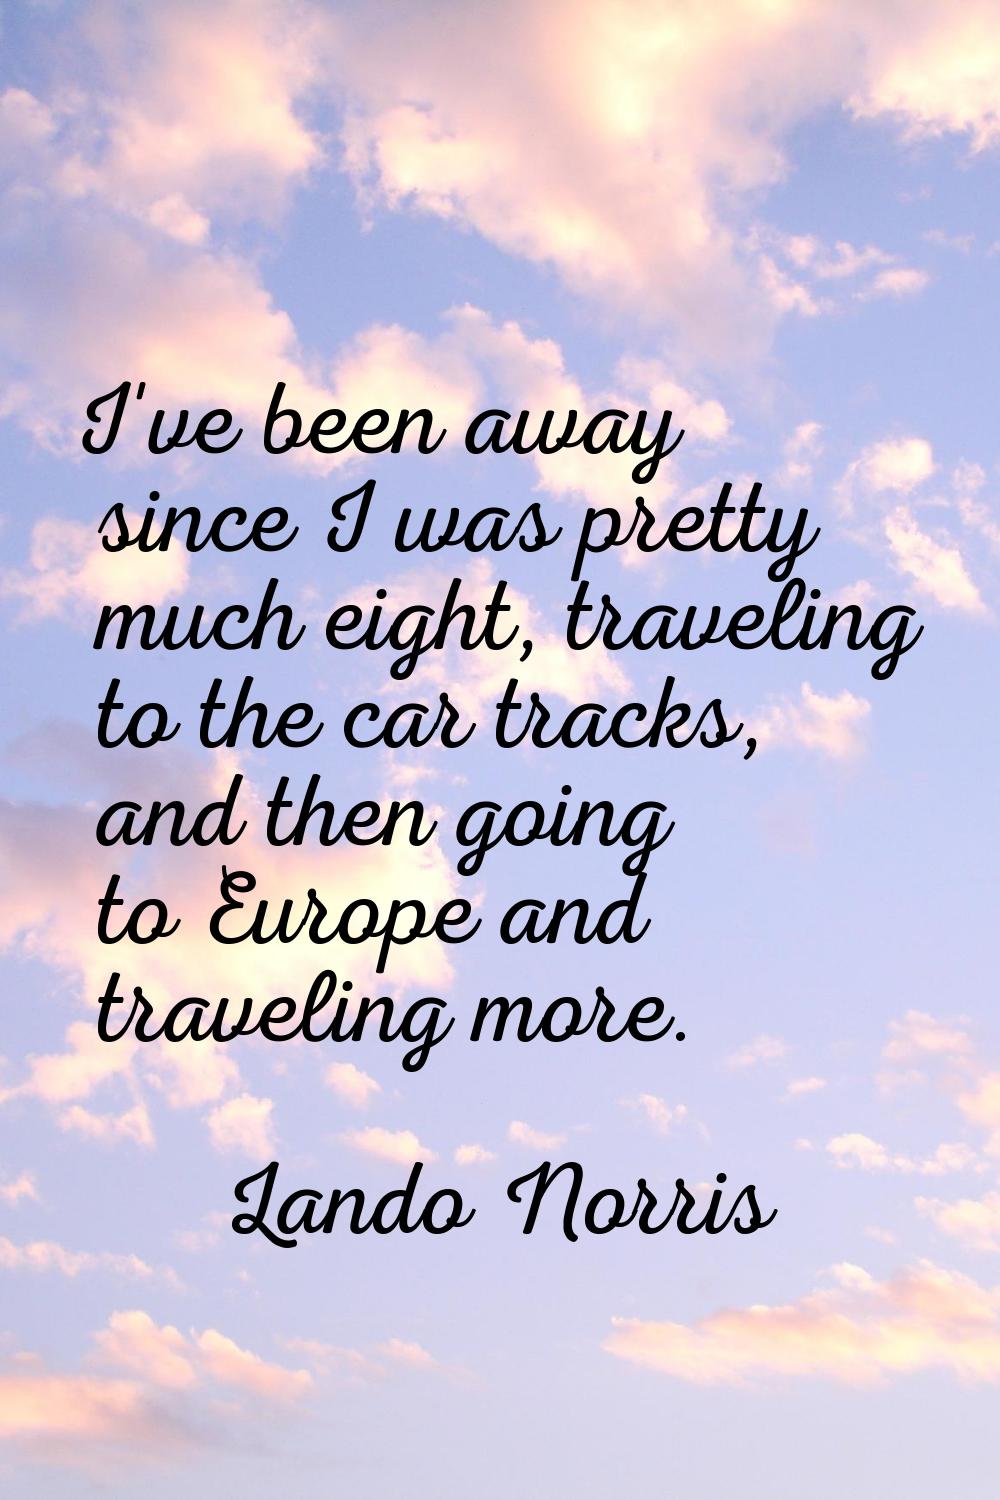 I've been away since I was pretty much eight, traveling to the car tracks, and then going to Europe